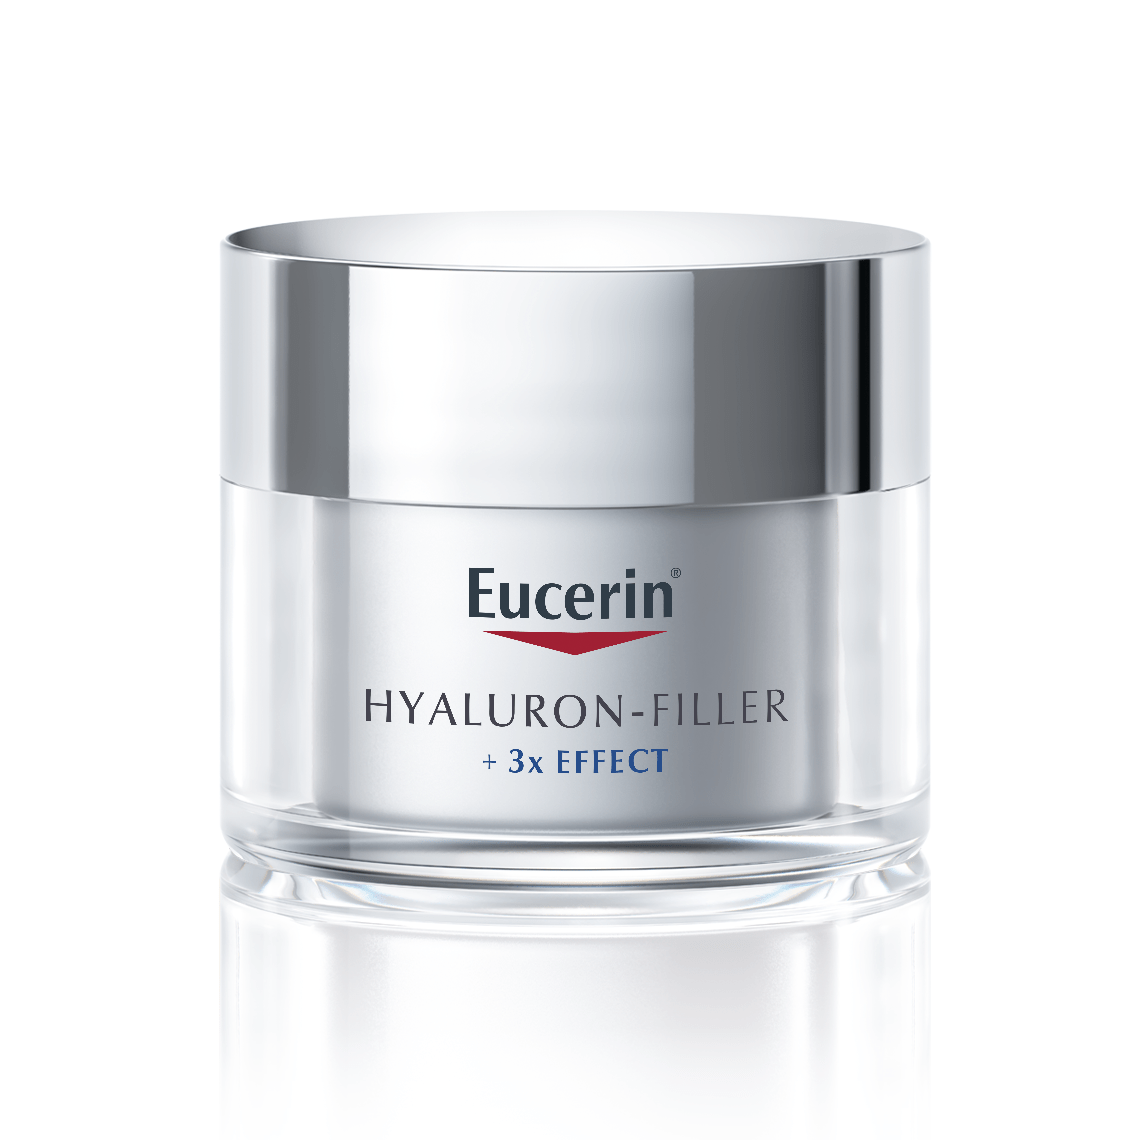 Counteracts the aging process. For visibly smoother, radiant, younger looking - Explore now!